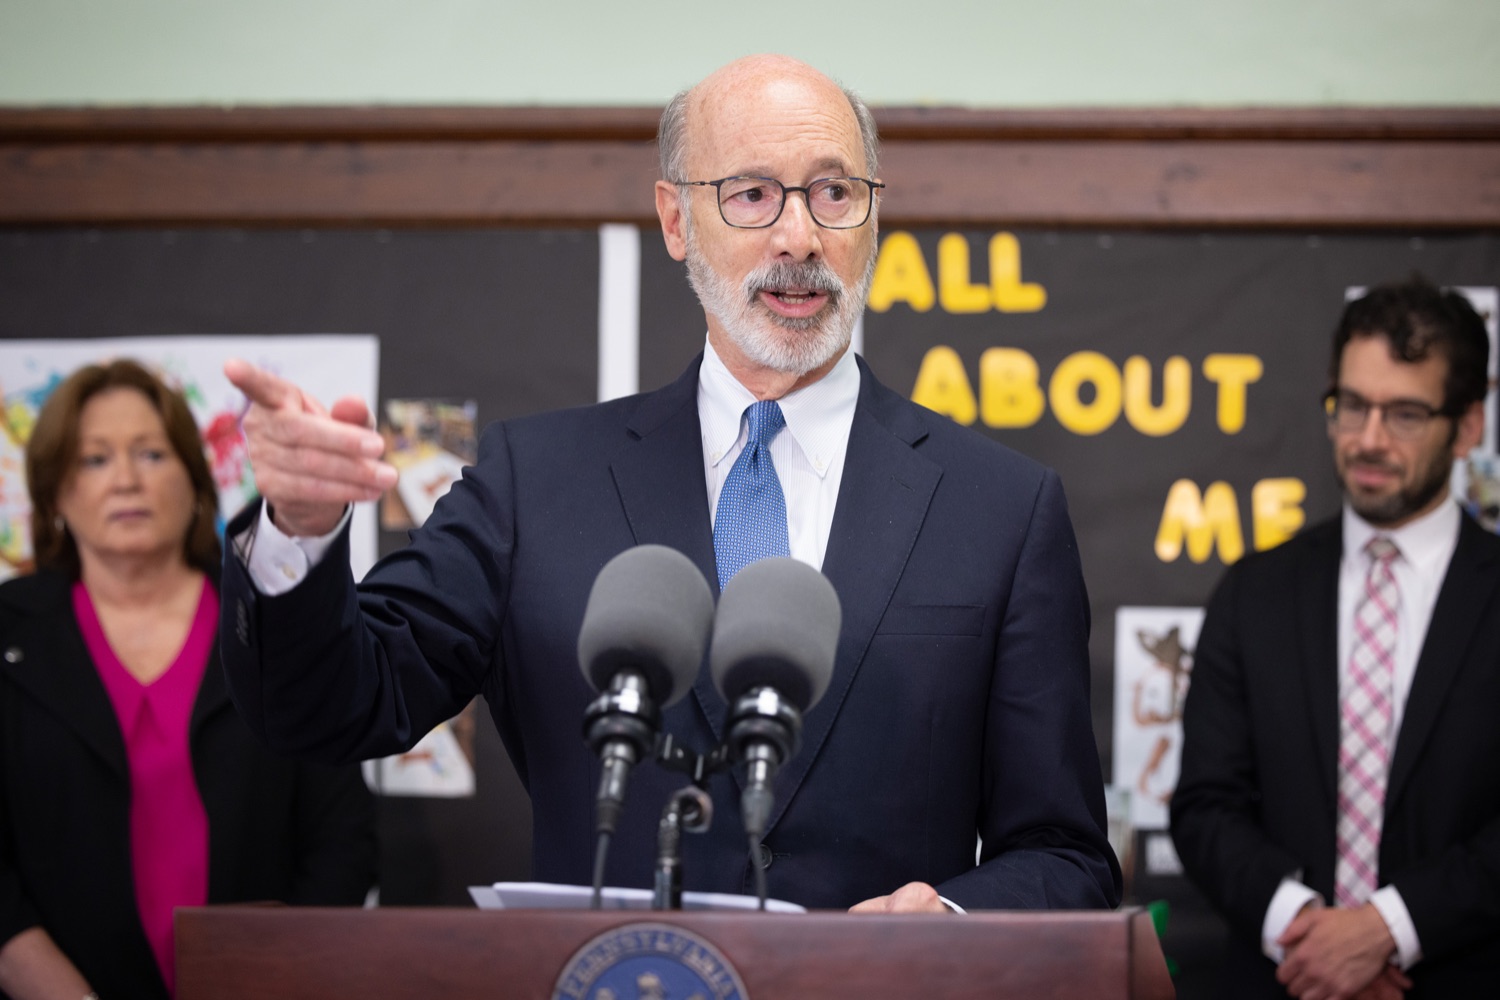 Pennsylvania Governor Tom Wolf speaks with the press.   Governor Tom Wolf joined childhood advocates and state lawmakers to highlight his accomplishments in increased funding for early childhood education during a visit to the Volunteers of America Children's Center in Allentown. In this year's budget alone, the Wolf Administration has secured a $79 million increase in early childhood education, providing more children and families in Pennsylvania with access to high-quality early learning programs through Pennsylvania Pre-K Counts and the Head Start Supplemental Assistance Program (HSSAP).  SEPTEMBER 09, 2022 - ALLENTOWN, PA<br><a href="https://filesource.amperwave.net/commonwealthofpa/photo/22174_gov_preKfunding_dz_006.JPG" target="_blank">⇣ Download Photo</a>